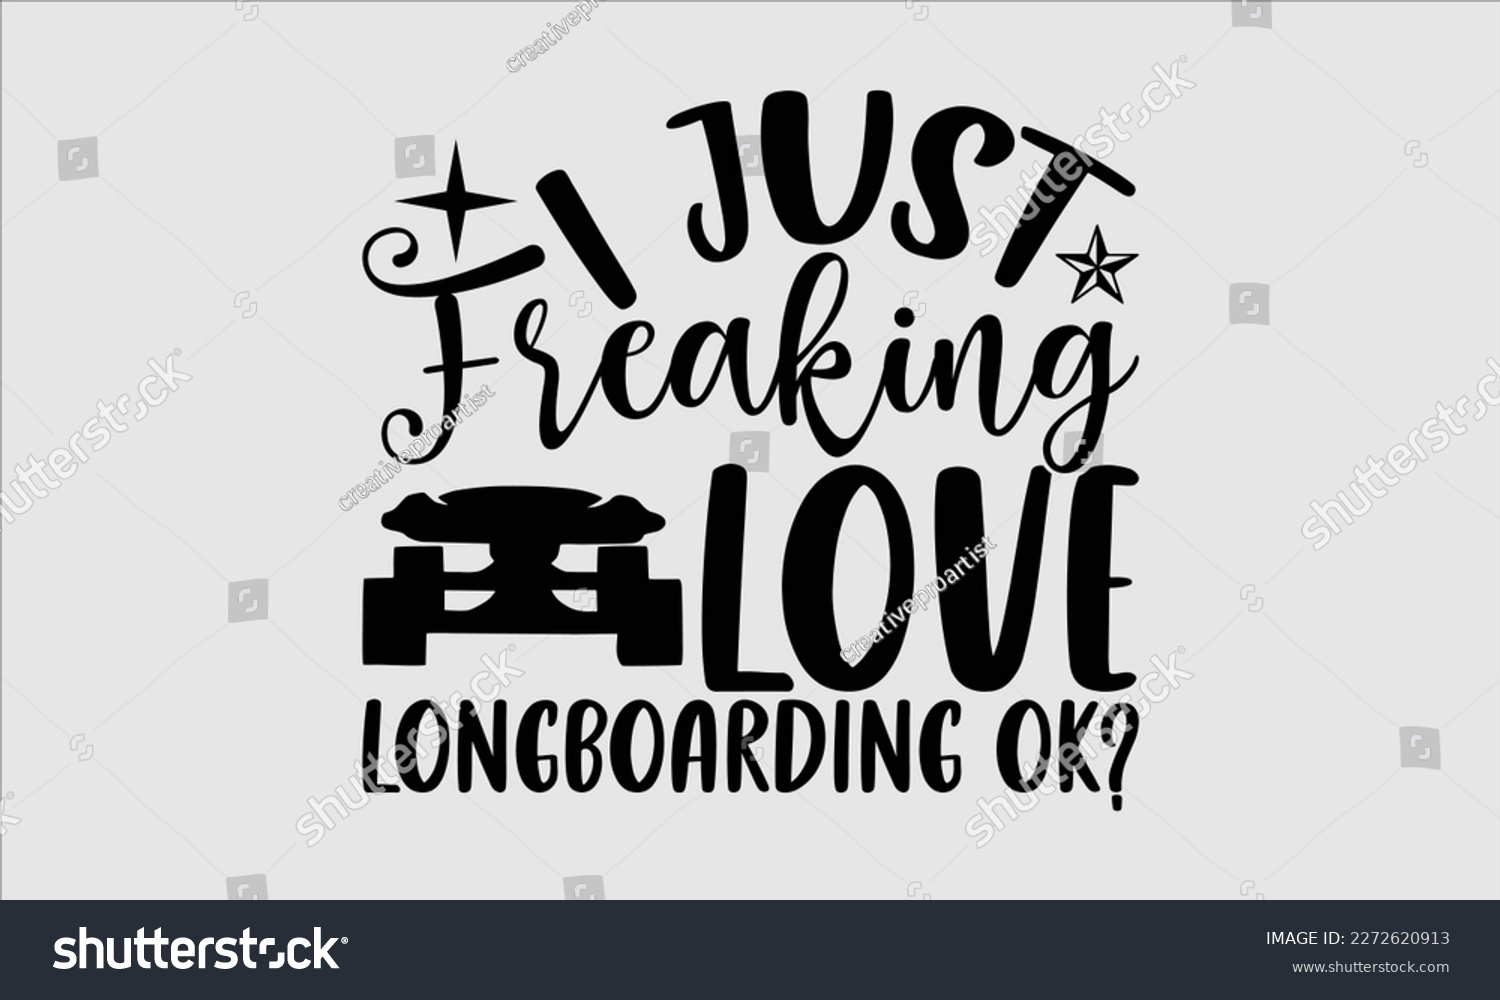 SVG of I just freaking love longboarding ok- Longboarding T- shirt Design, Hand drawn lettering phrase, Illustration for prints on t-shirts and bags, posters, funny eps files, svg cricut svg